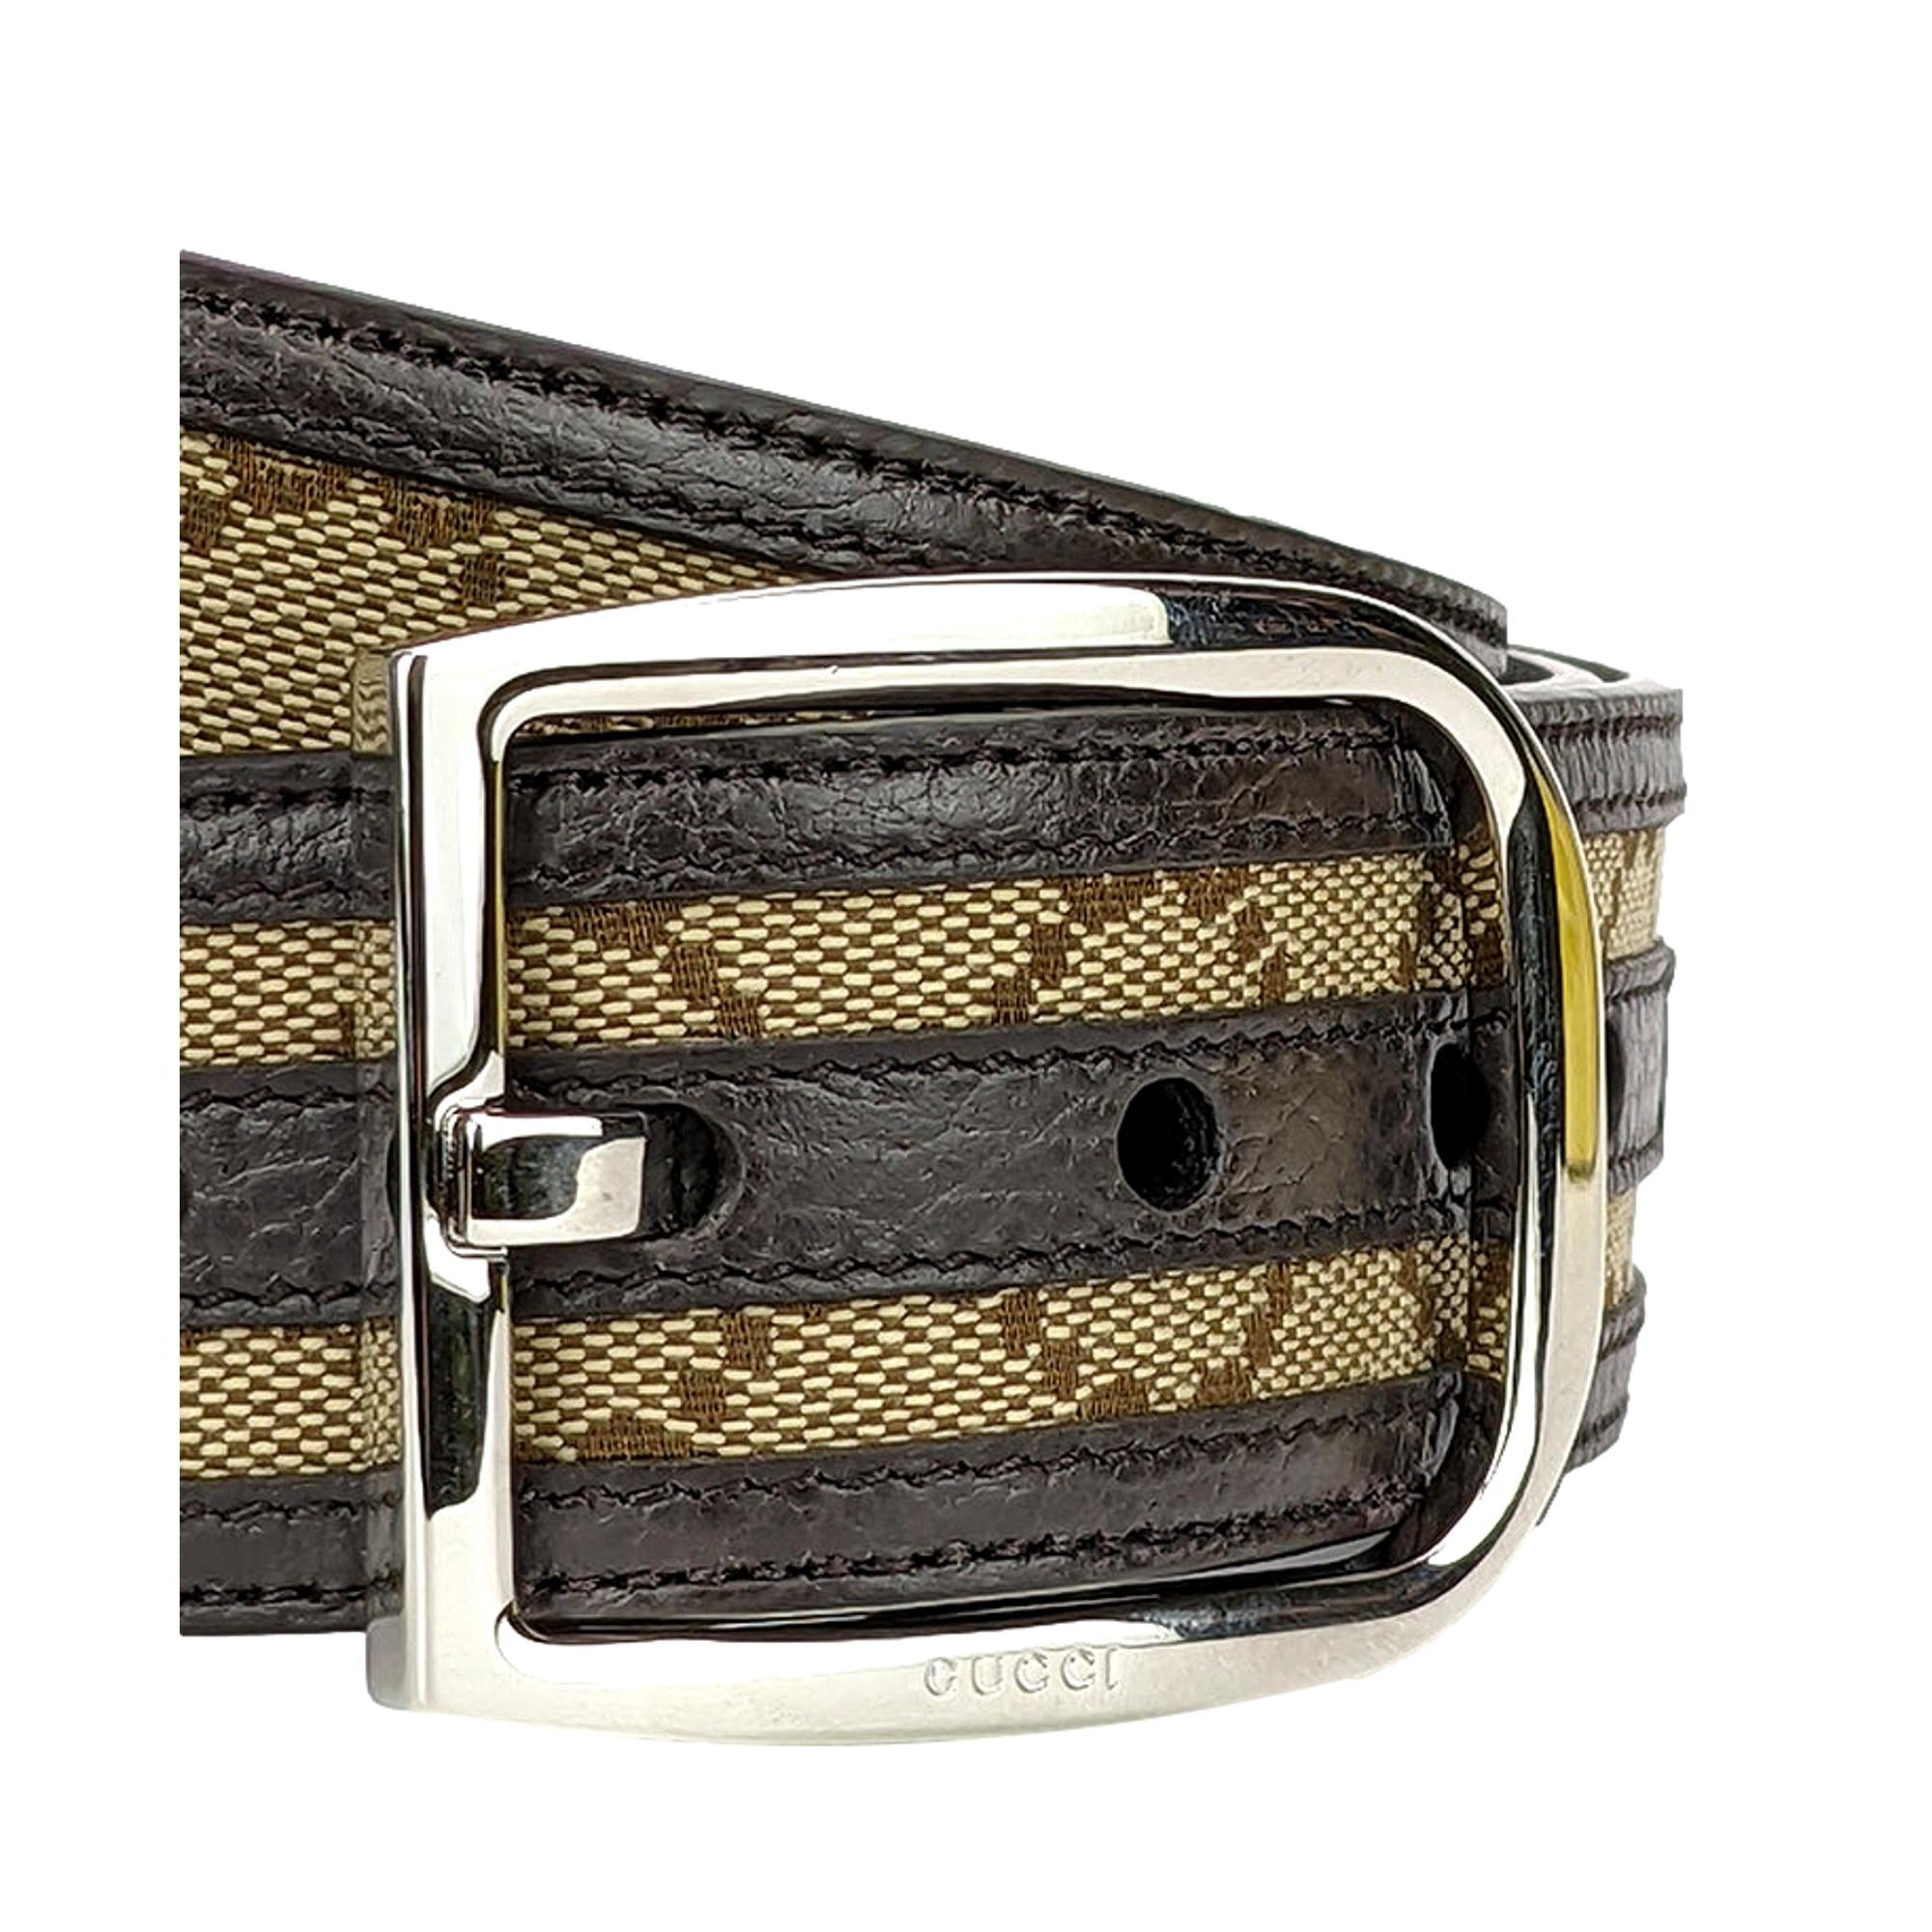 Gucci GG Brown and Beige Canvas Leather Trim Belt Size 36/90